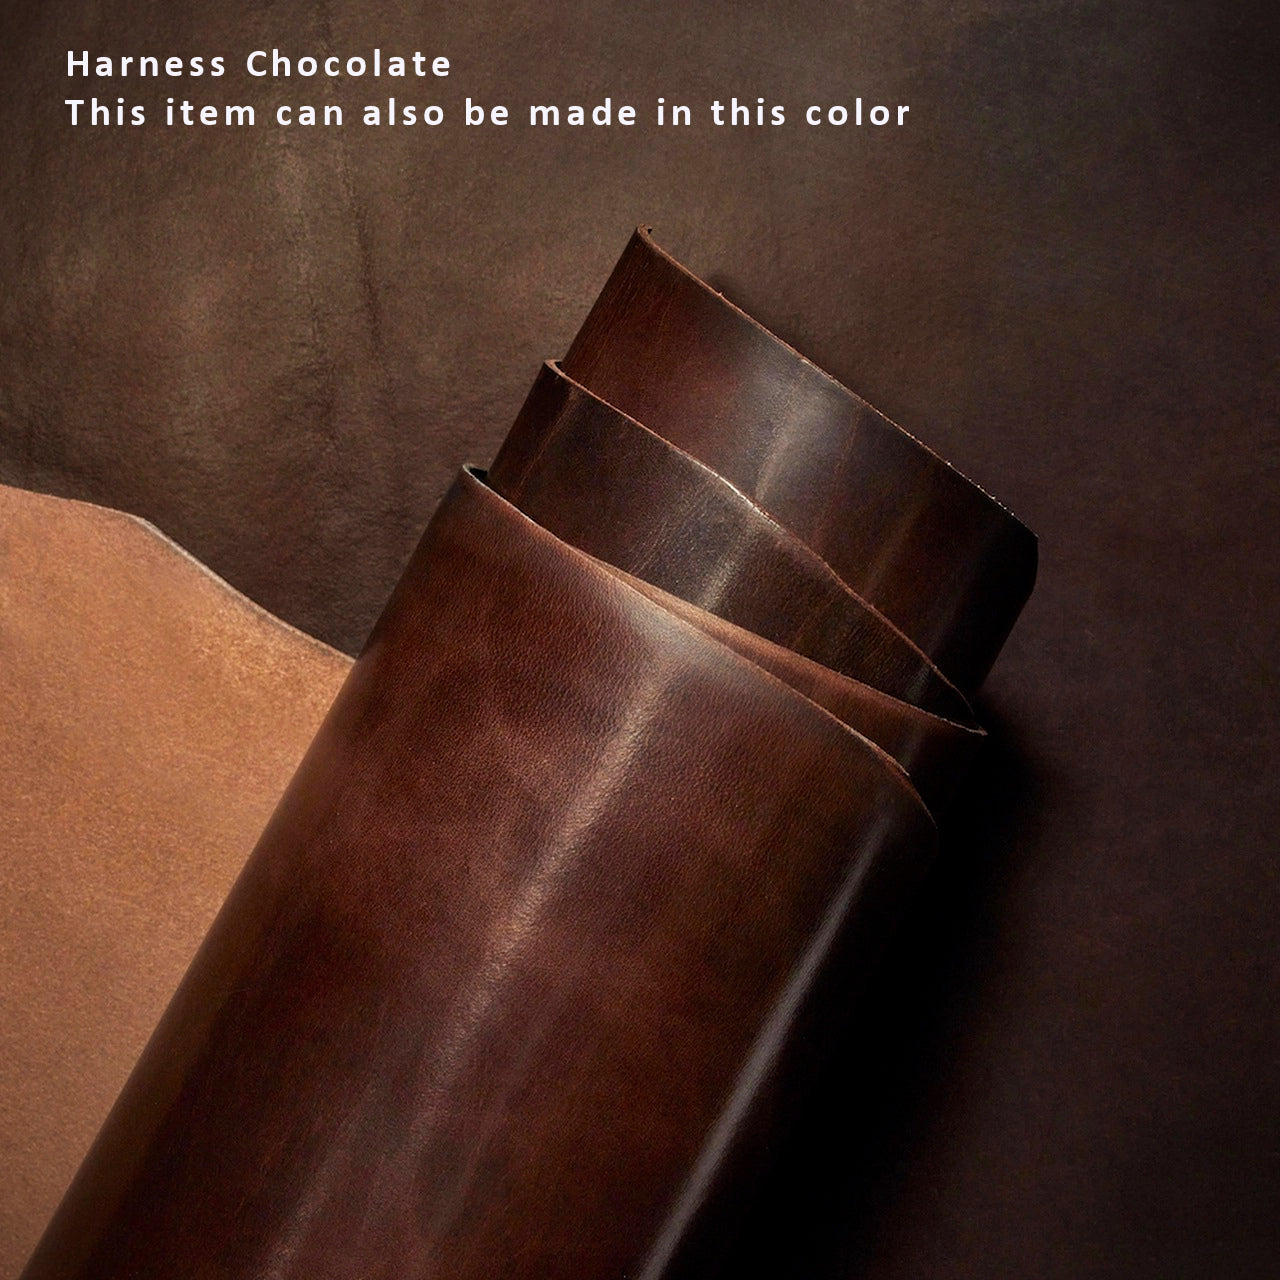 #color_harness chocolate